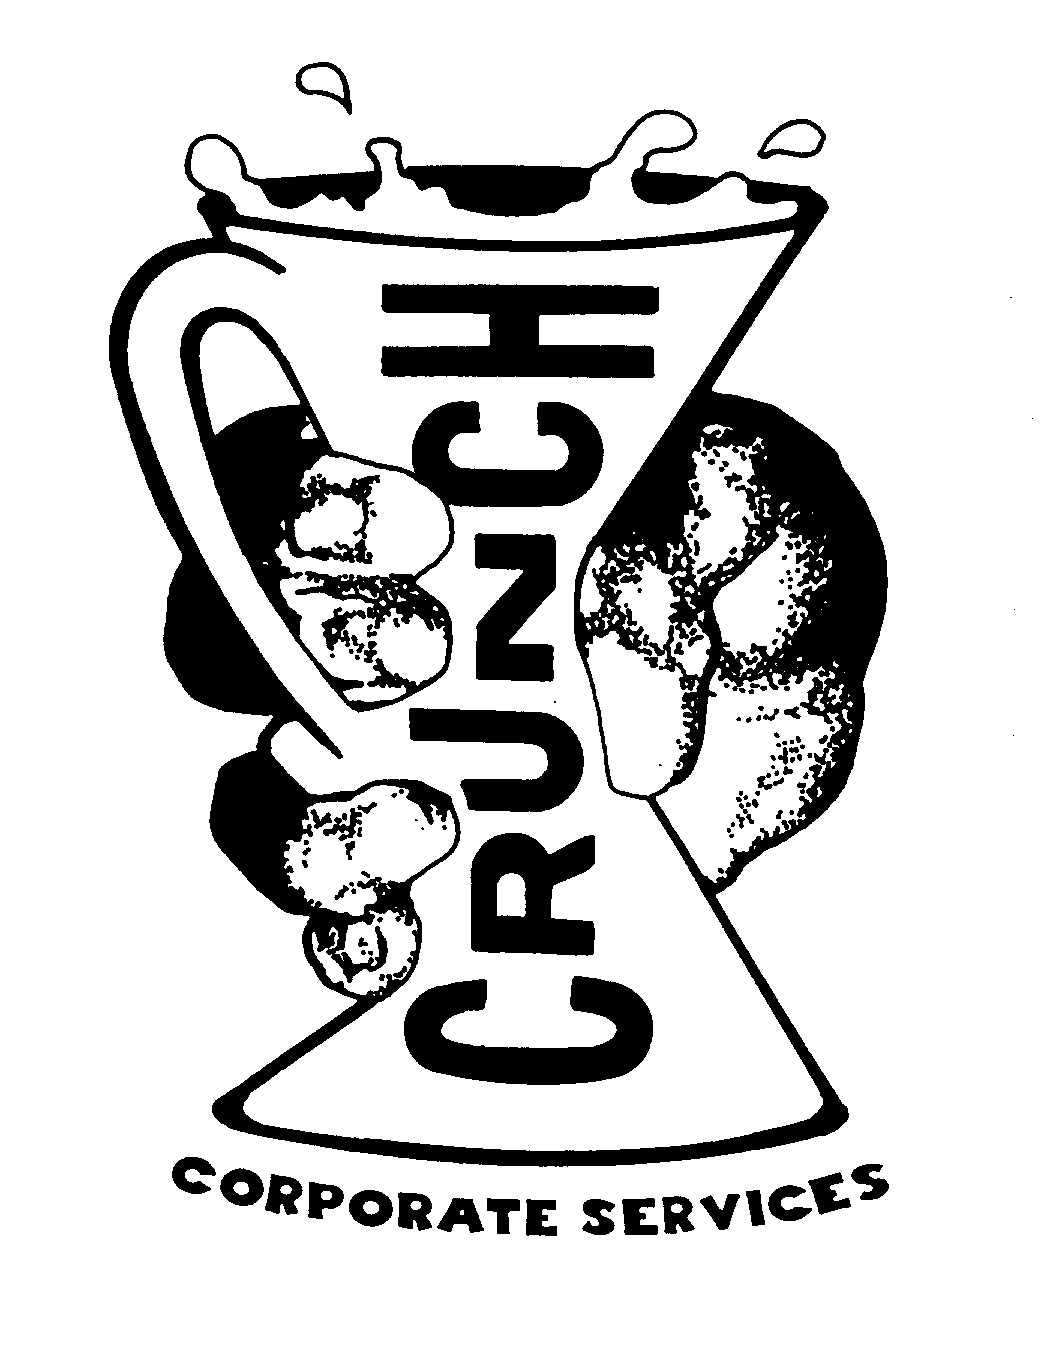  CRUNCH CORPORATE SERVICES